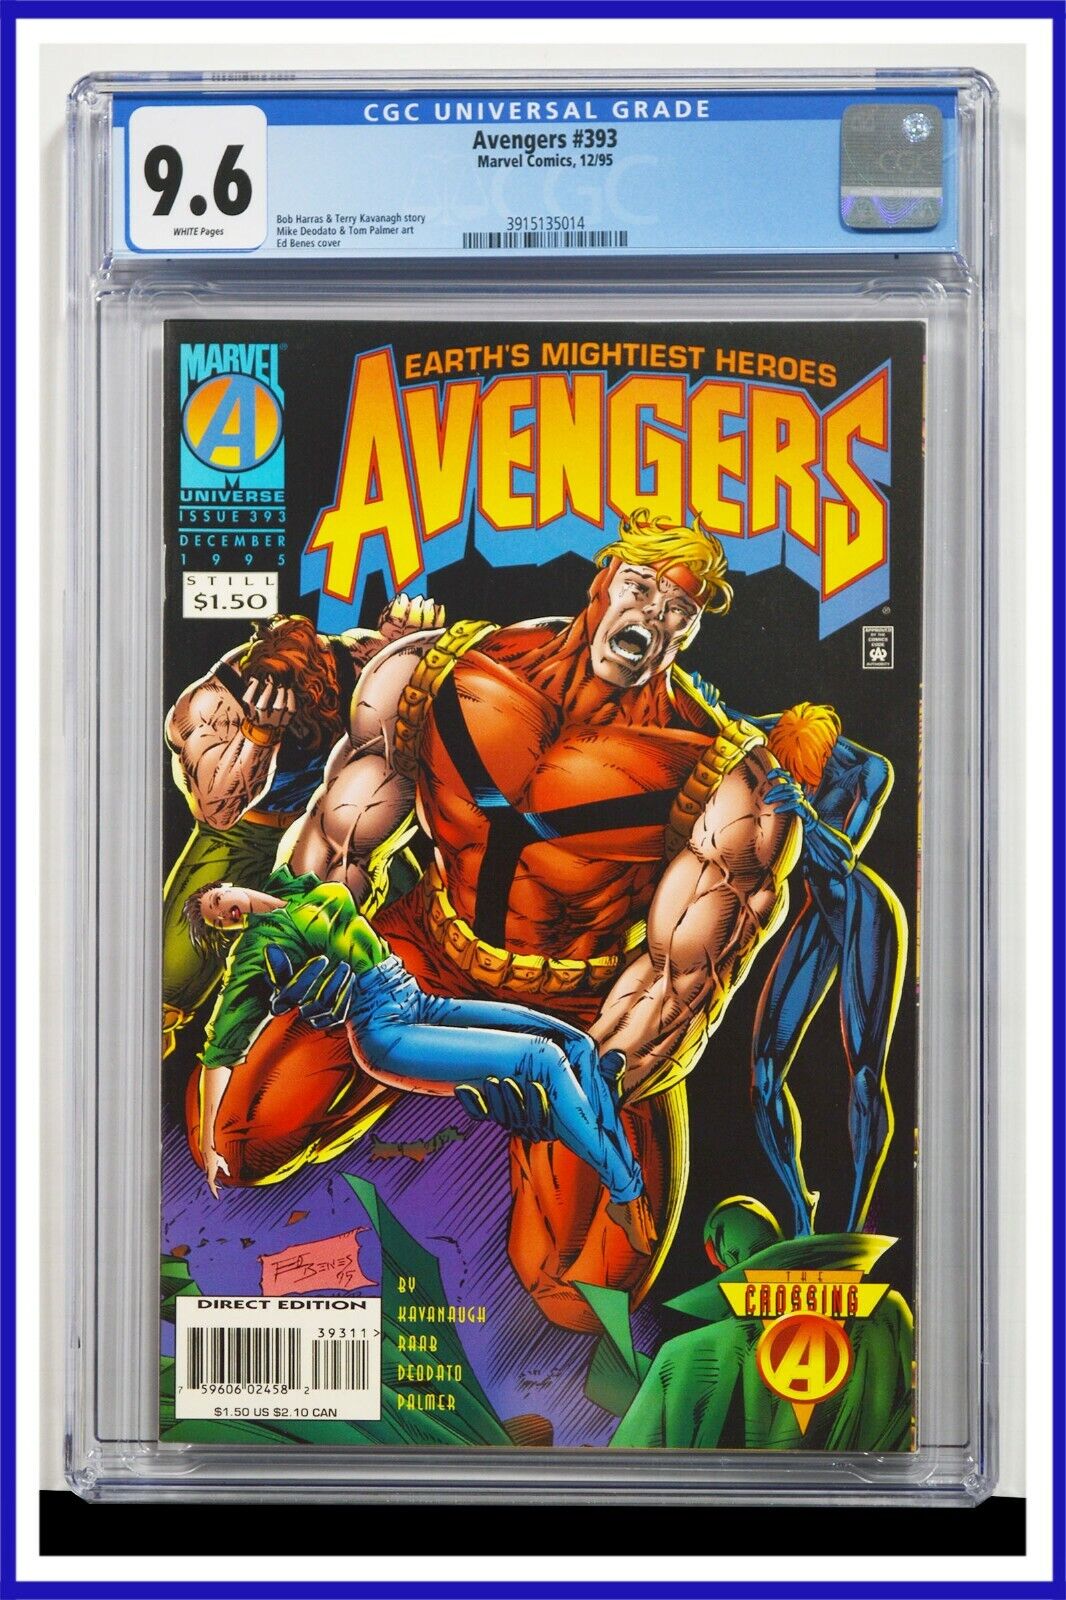 Avengers #393 CGC Graded 9.6 Marvel December 1995 White Pages Comic Book.